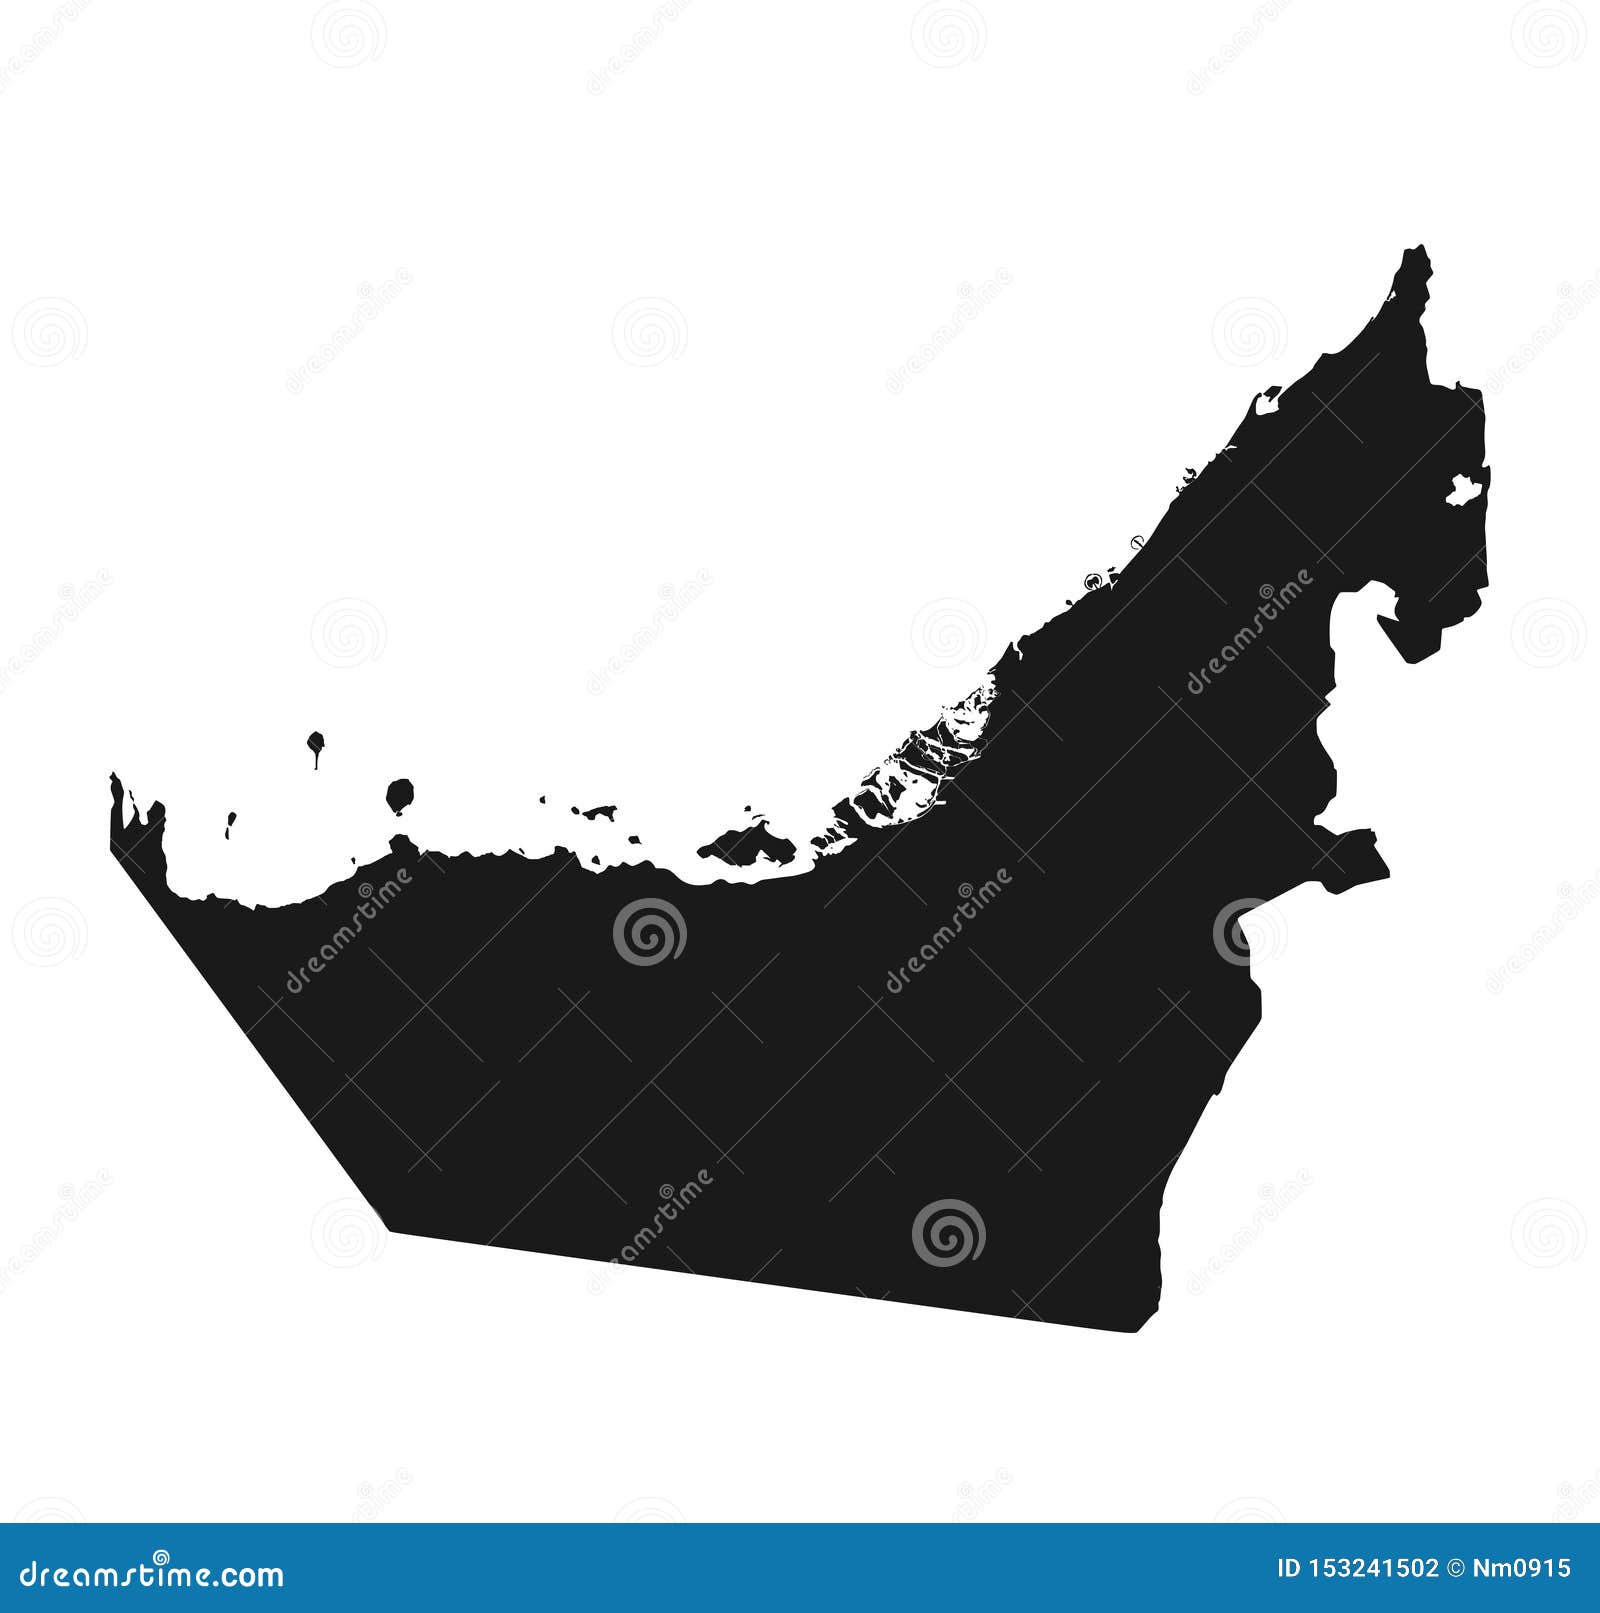 united arab emirates map icon.   black silhouette high detailed image of country